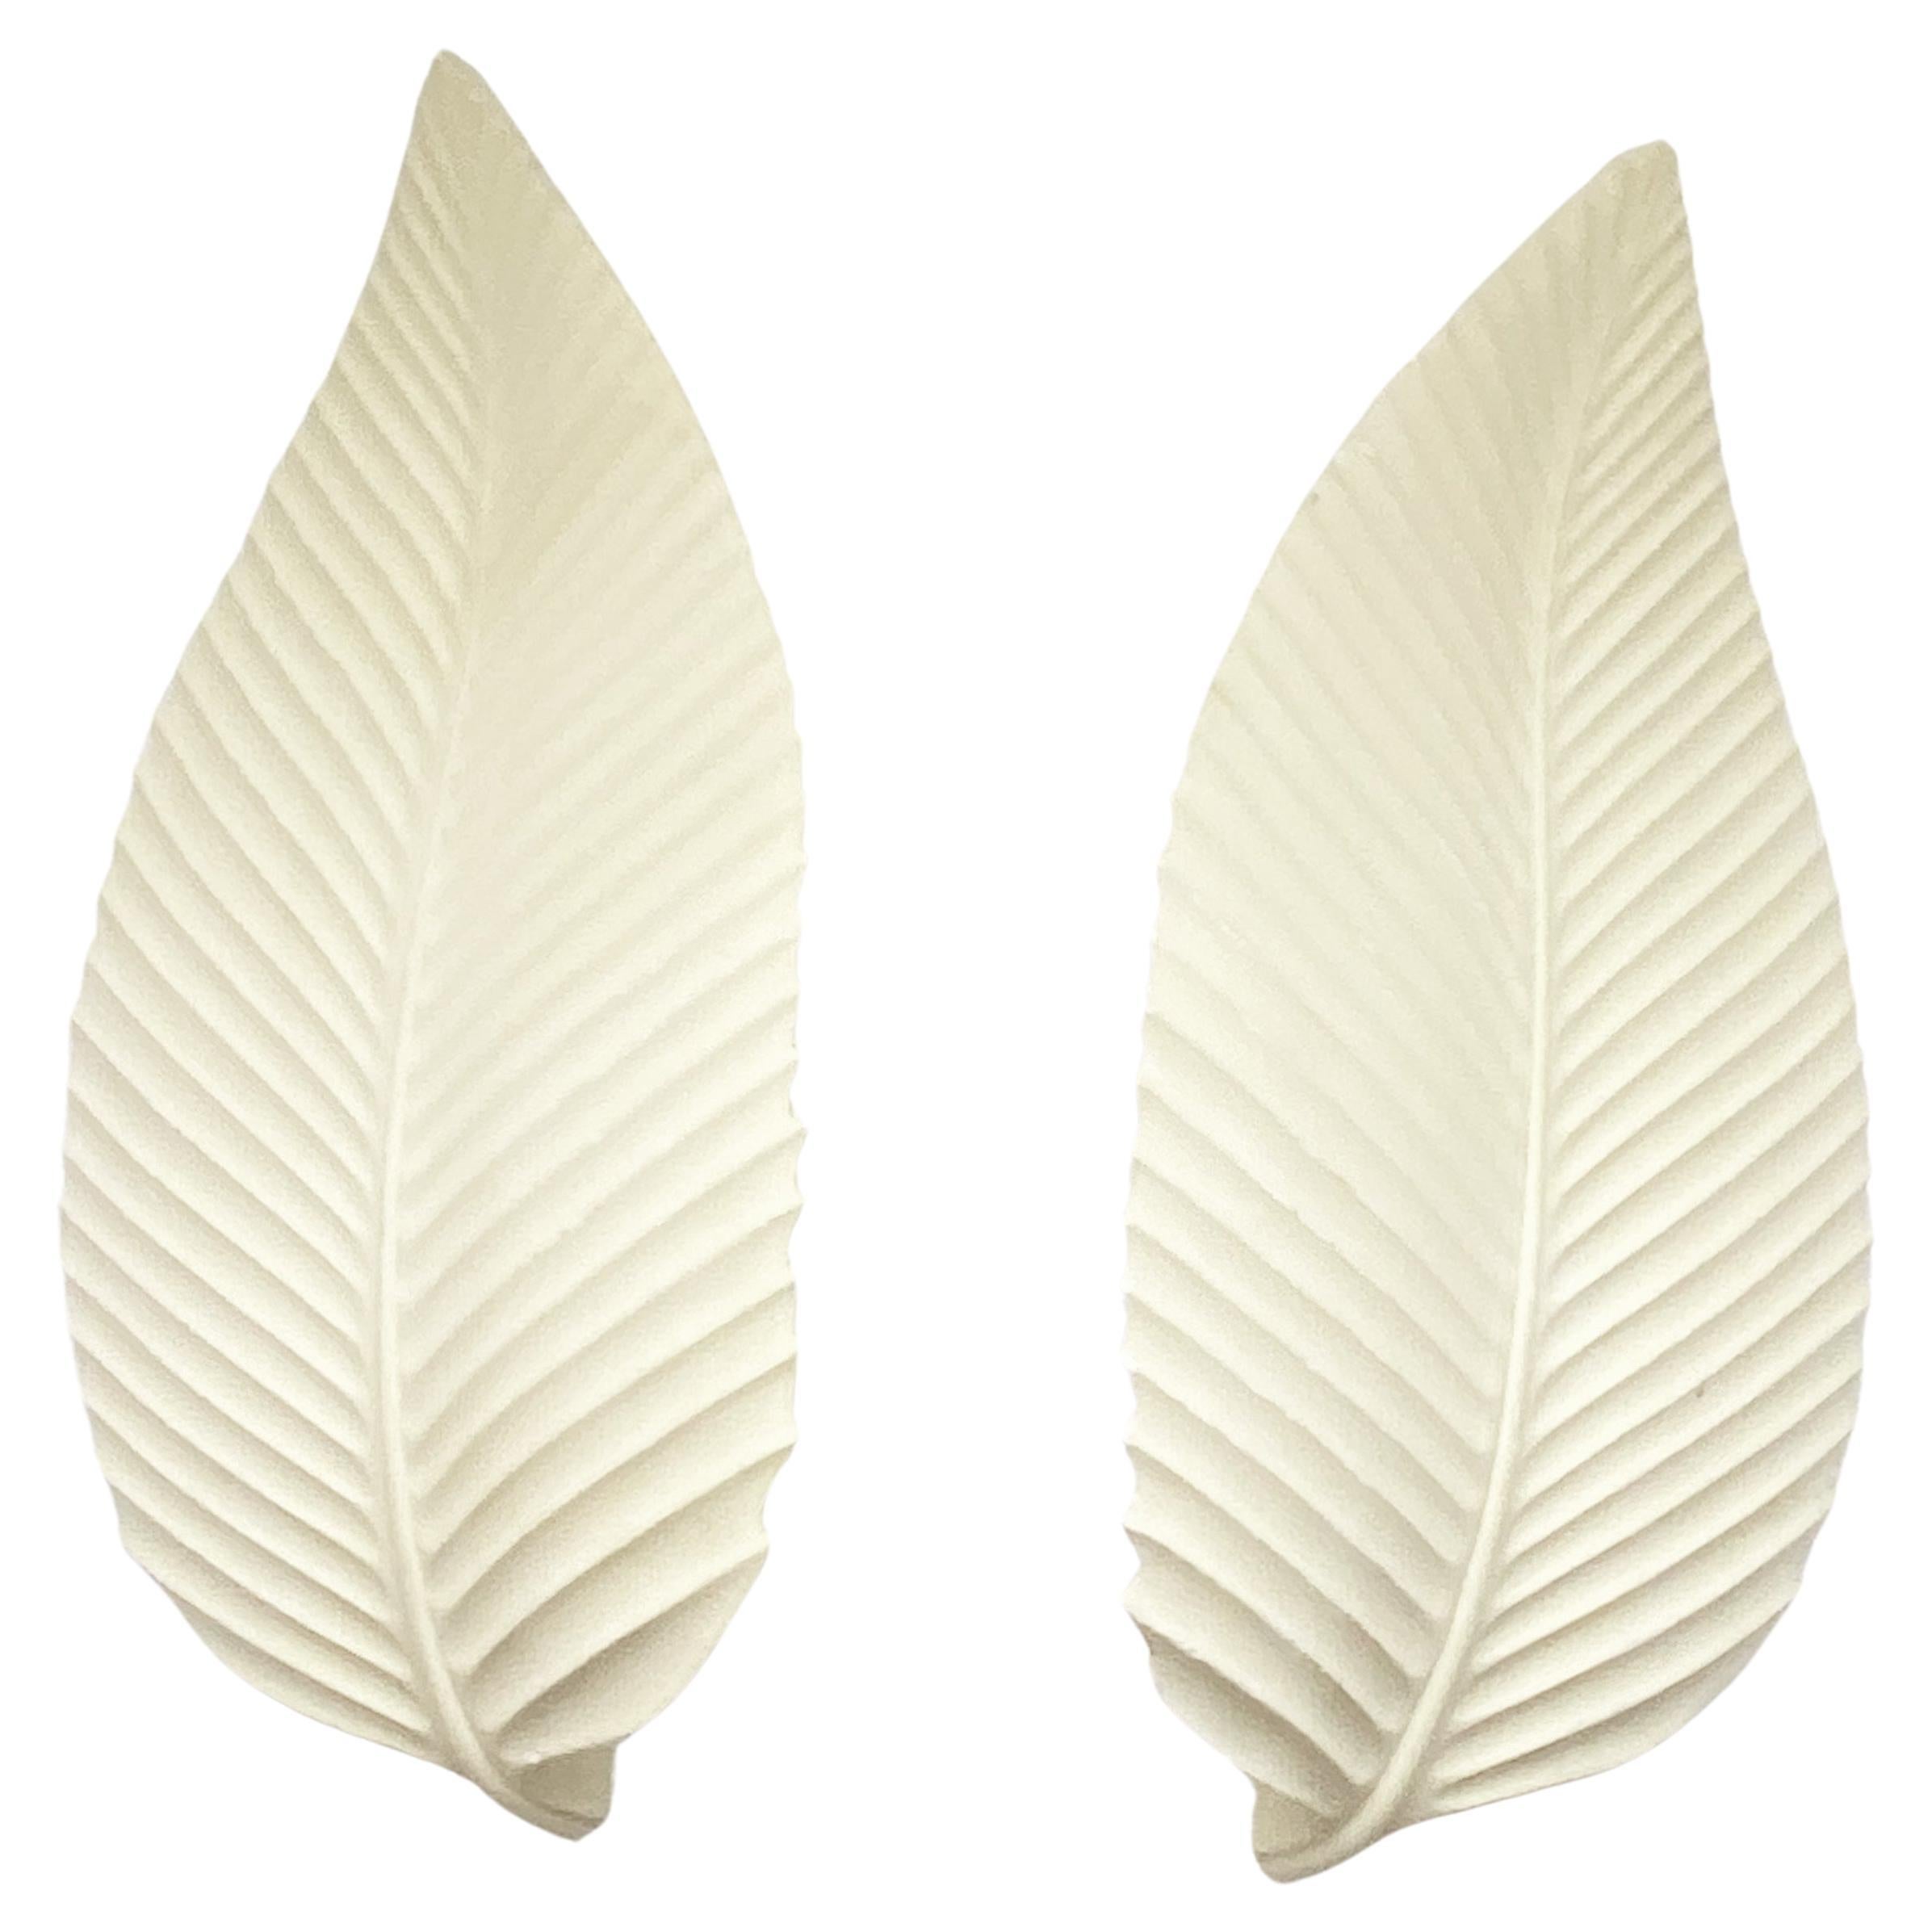 French Plaster Beech Leaf Sconce in the style of Atelier Sedap, 1990s, set of 2.